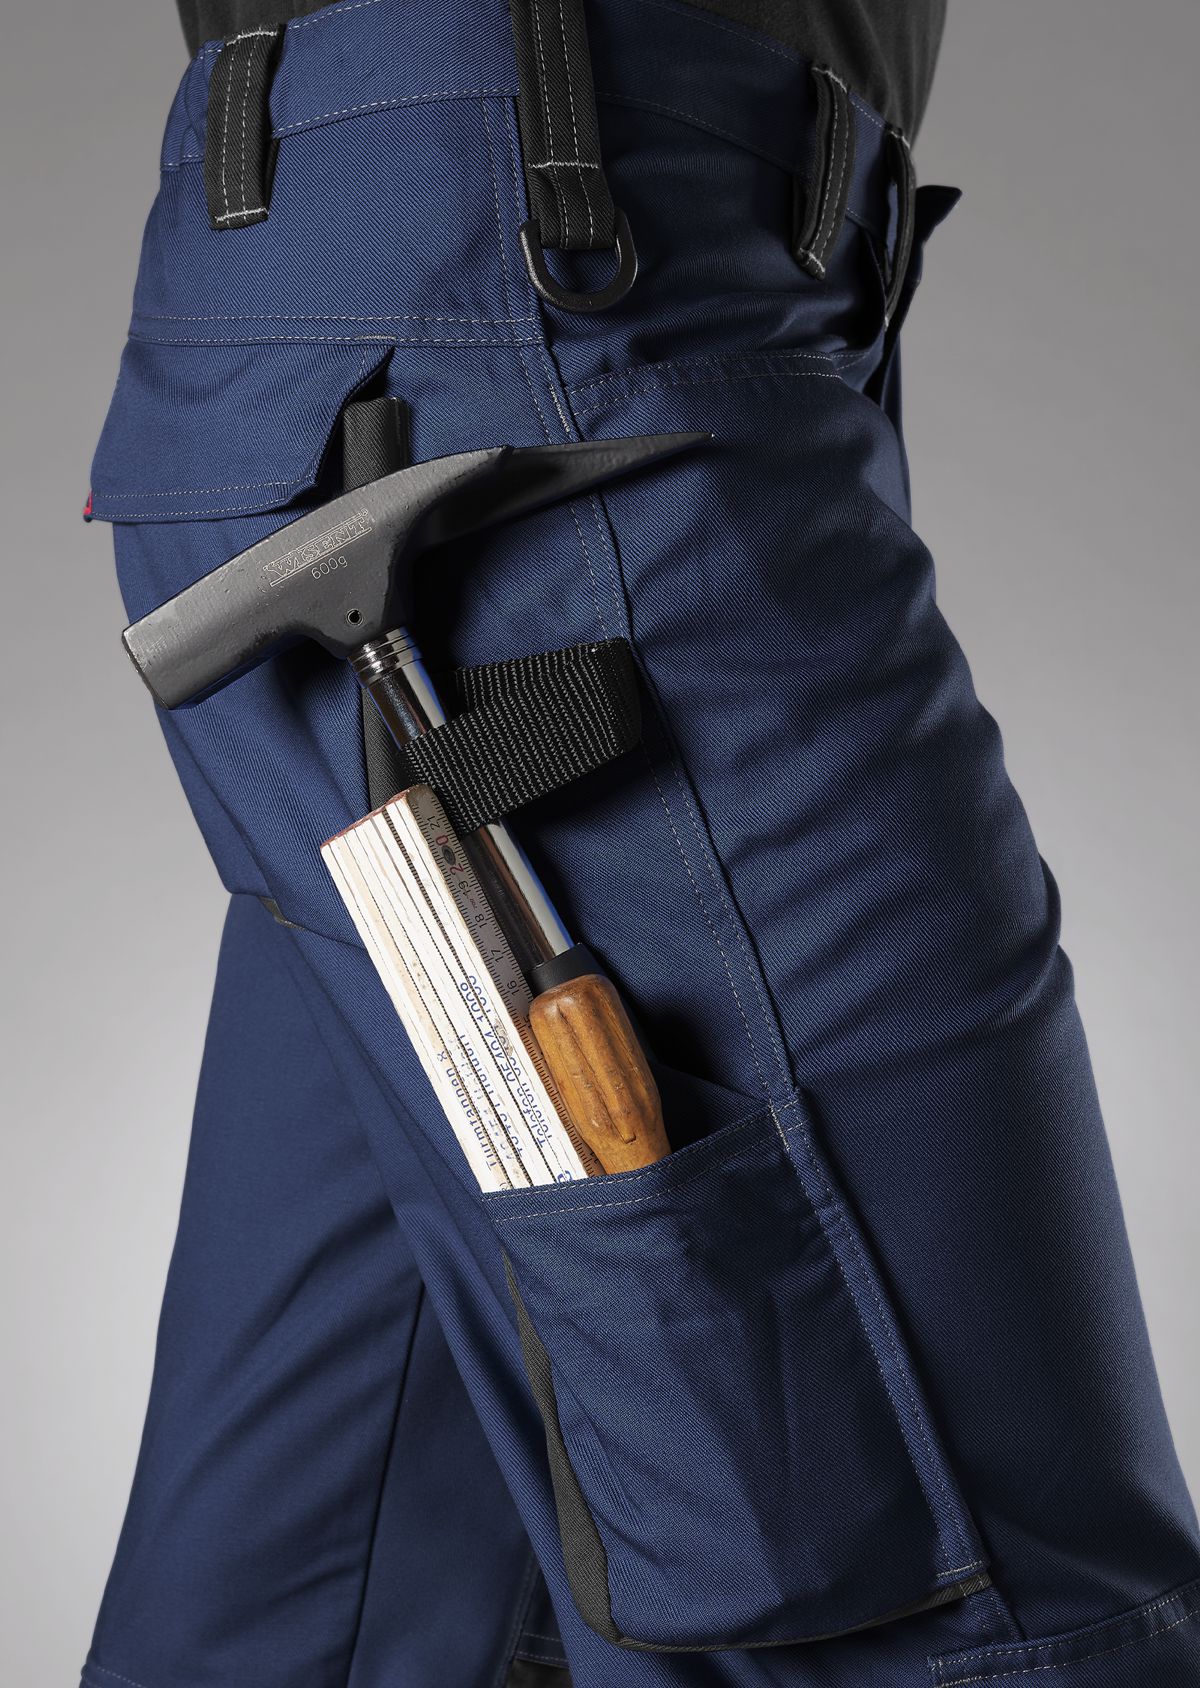 BP® Comfort work trousers with reflectors and knee pad pockets